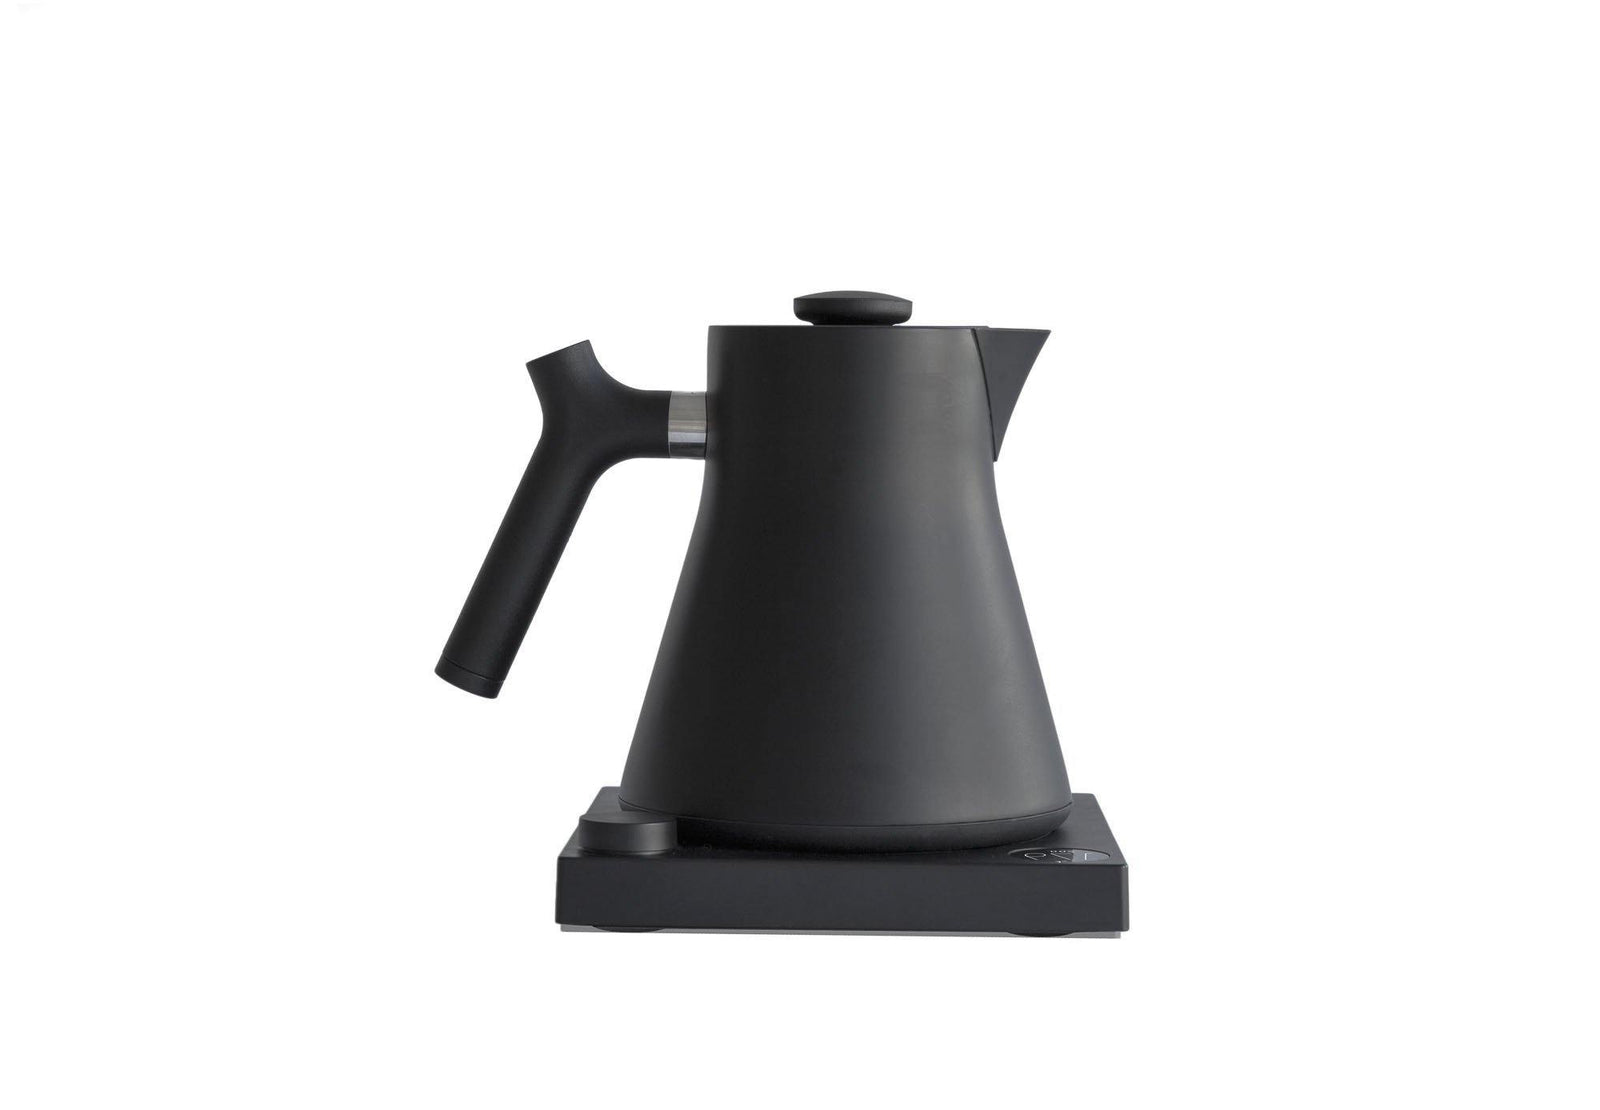 Stagg [XF] Pour-Over Set - Allred Collaborative